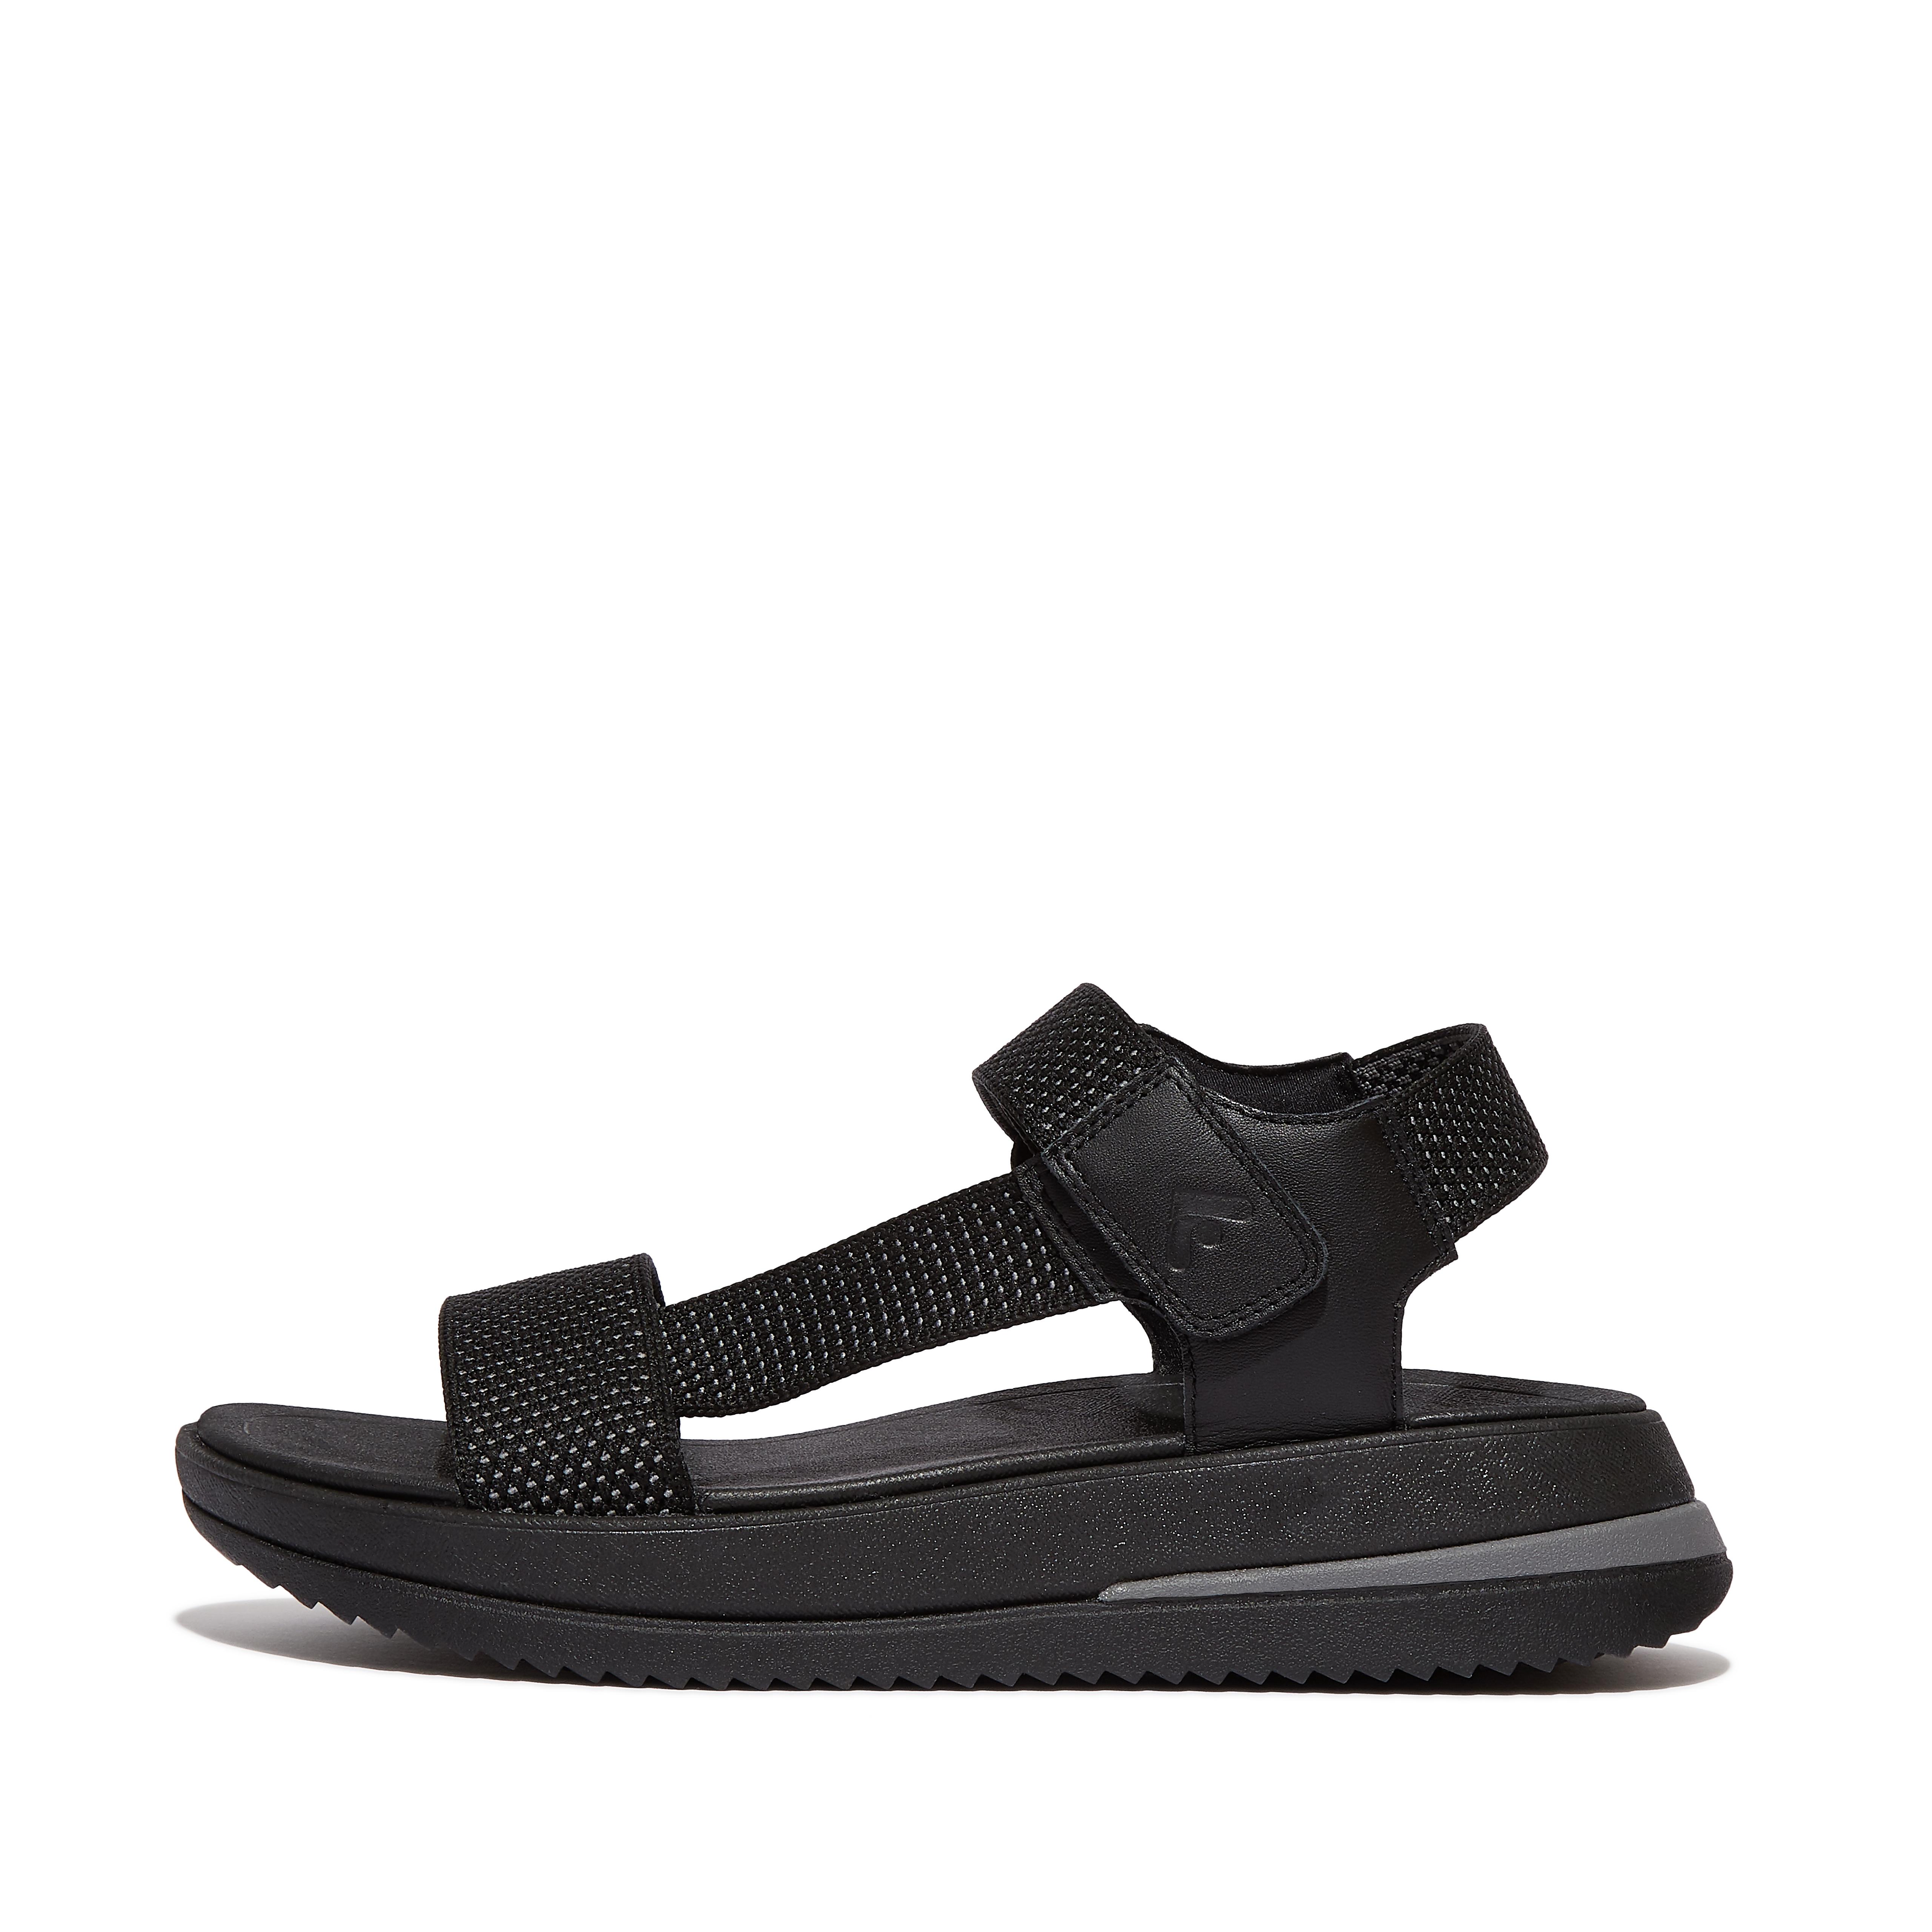 Fitflop Two-Tone Sports-Webbing/Leather Back-Strap Sandals,Black